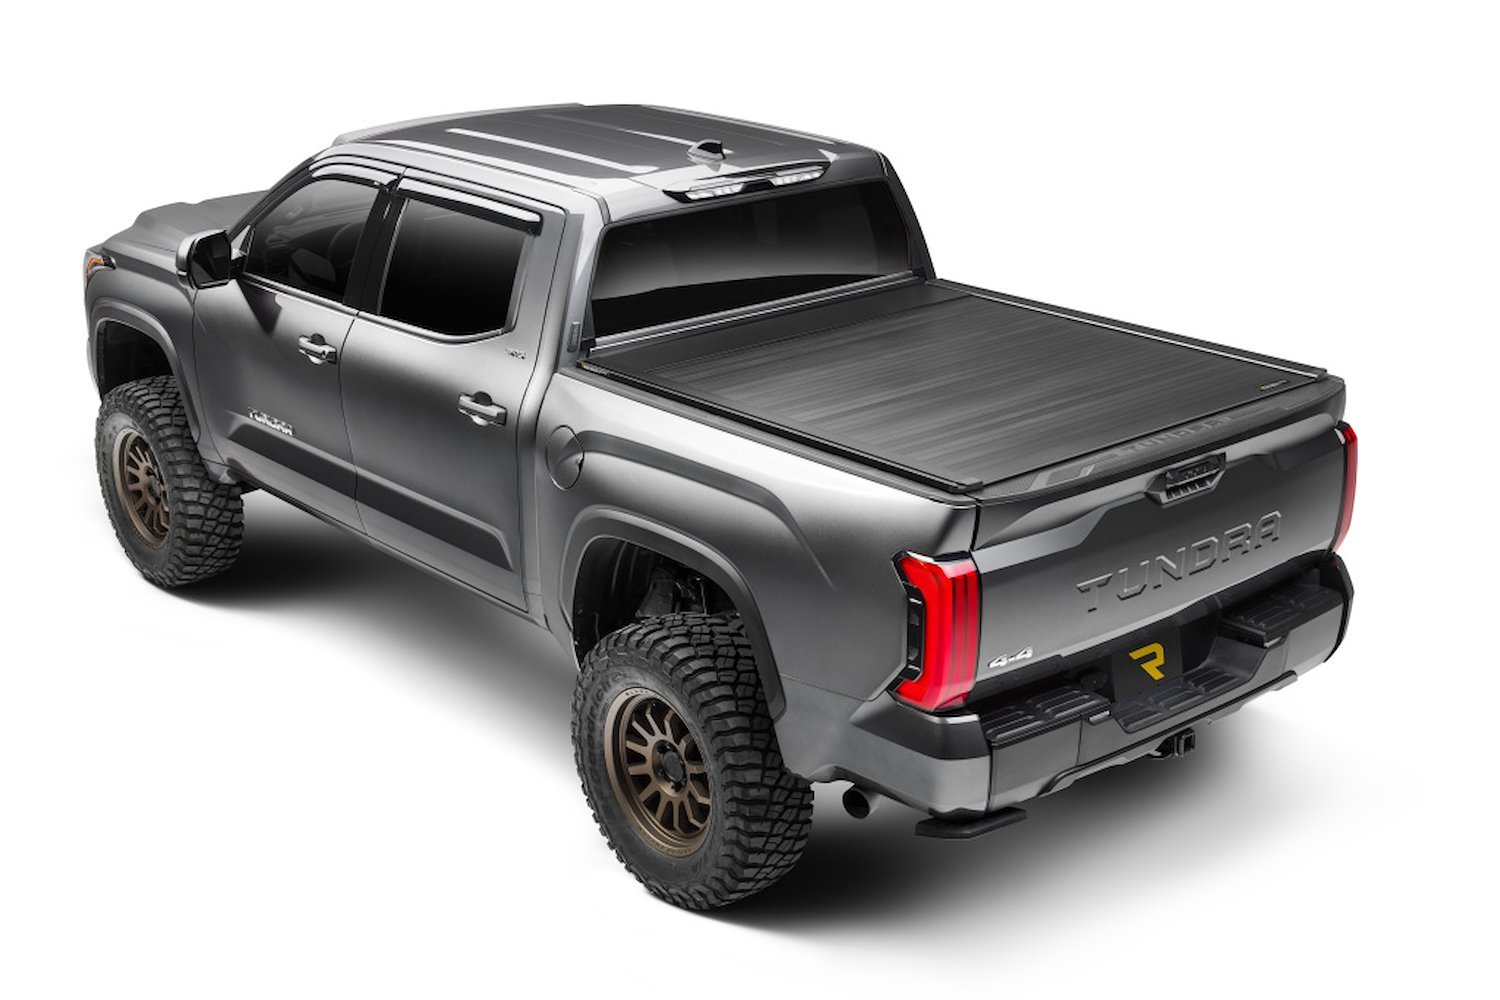 EQ0481 EQ Retractable Tonneau Cover 2019-2022 Chevy Silverado/GMC Sierra 5' 9" Bed without Stake Pockets